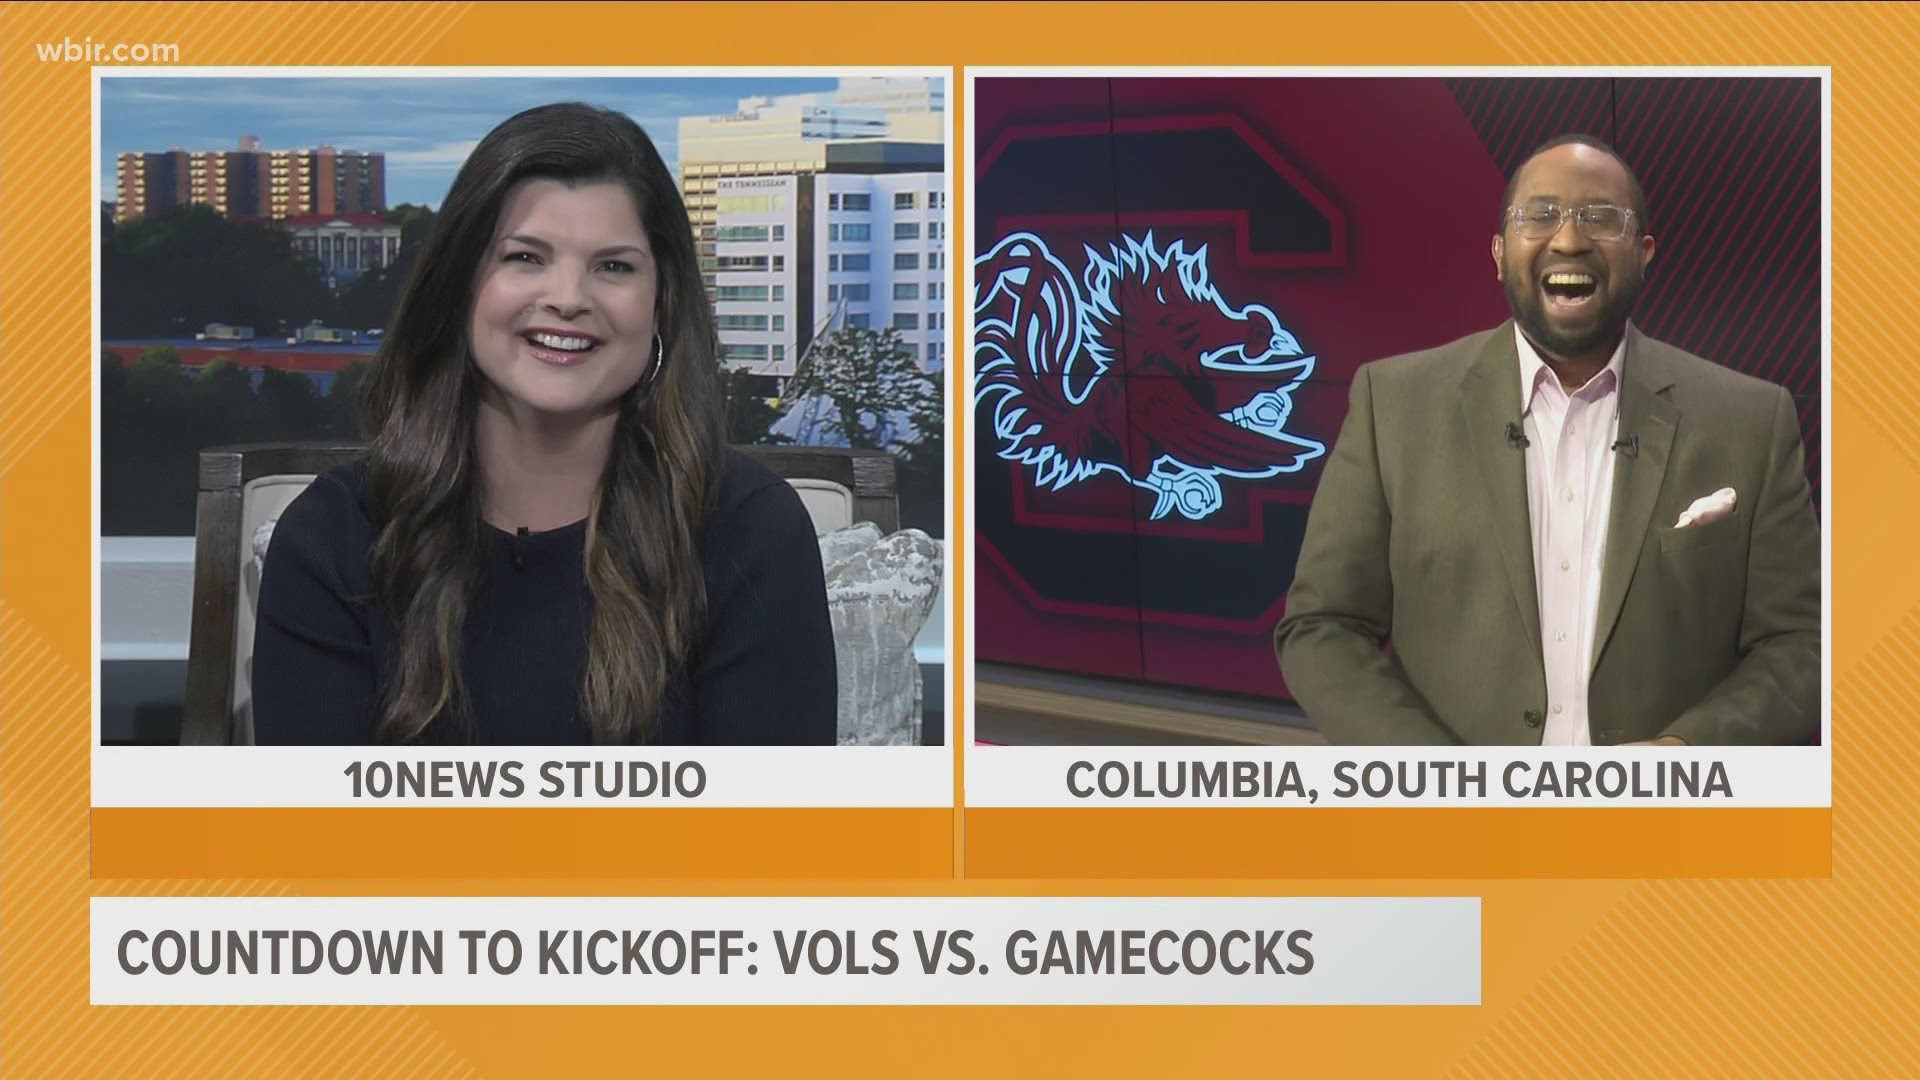 10News Anchor Heather Waliga talks with Brandon Taylor from our South Carolina sister station in a friendly rivalry ahead of the season opener.